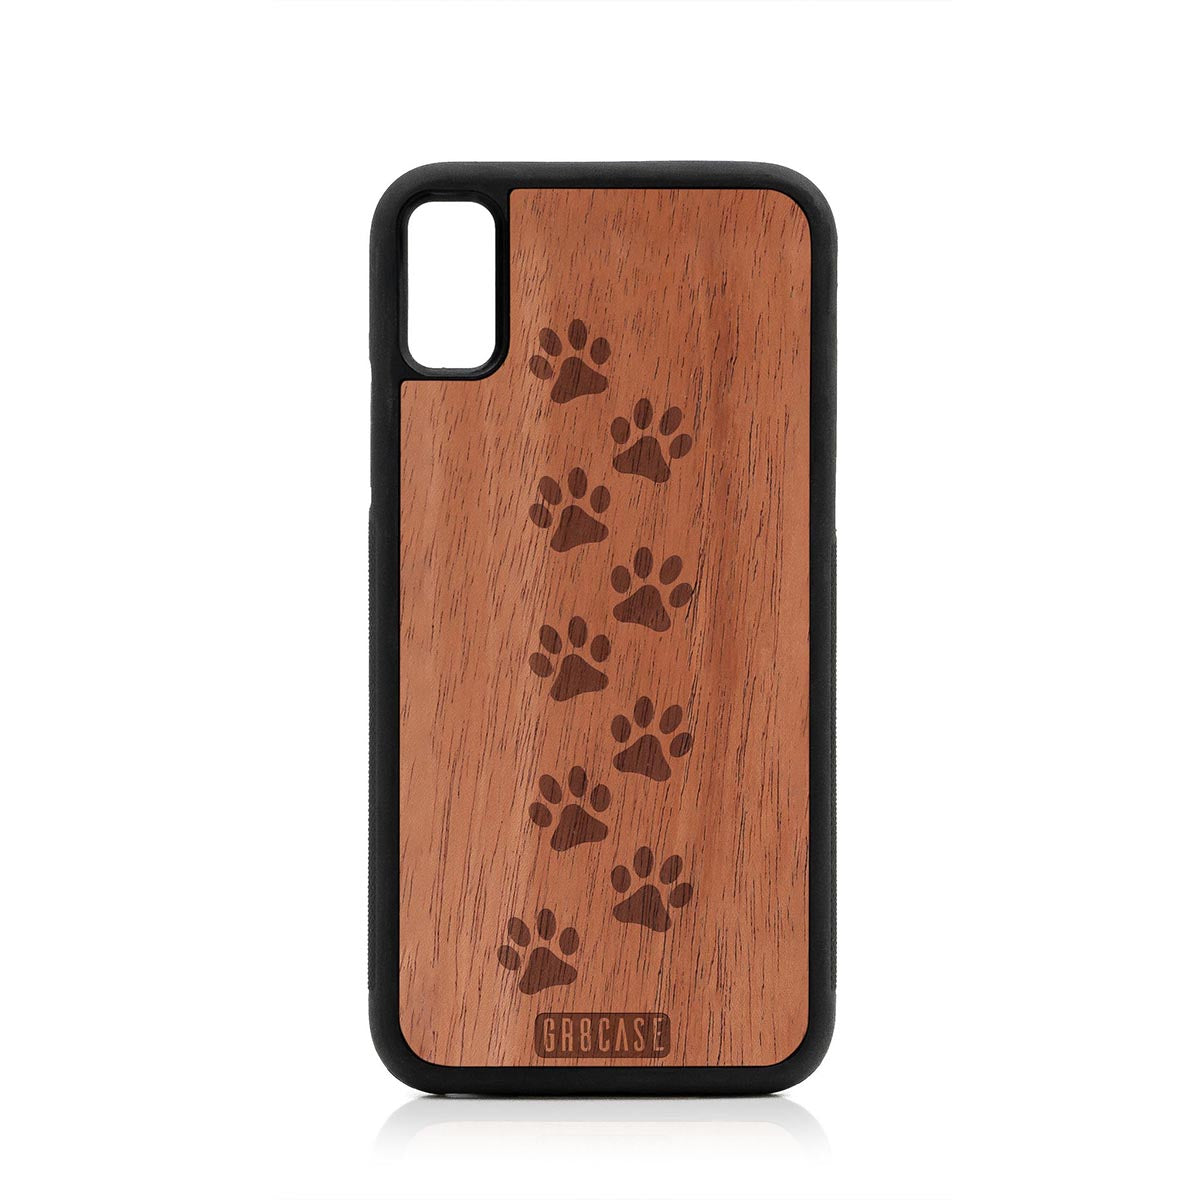 Paw Prints Design Wood Case For iPhone XS Max by GR8CASE